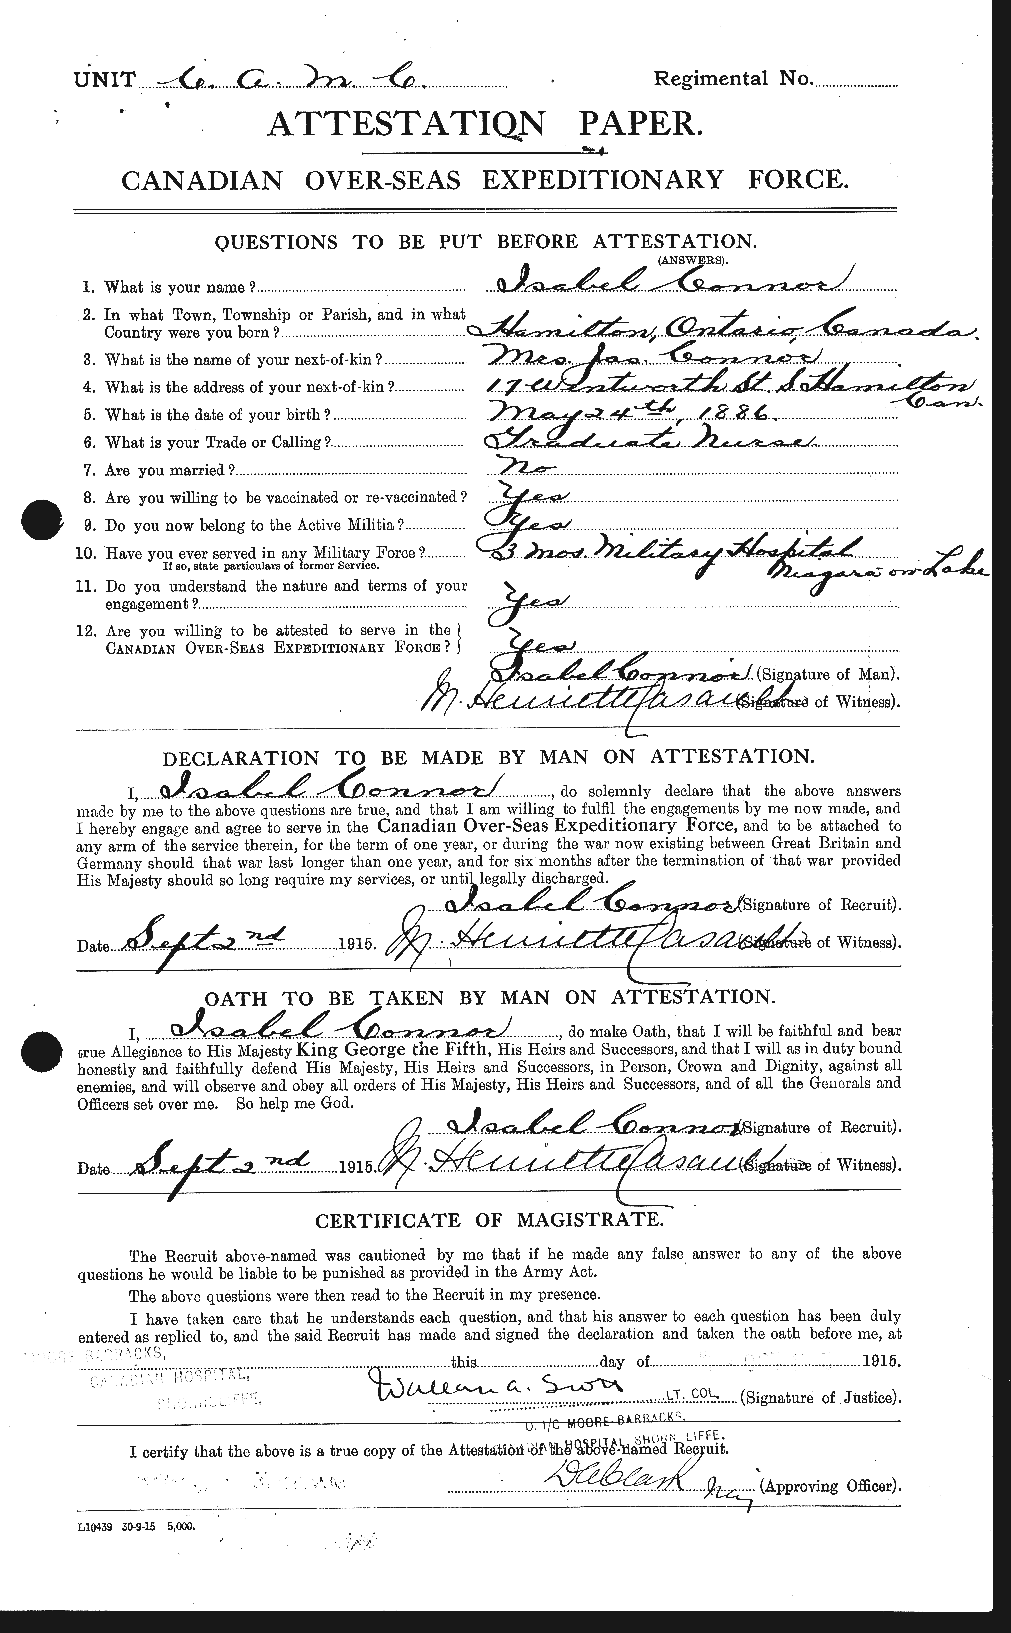 Personnel Records of the First World War - CEF 068883a